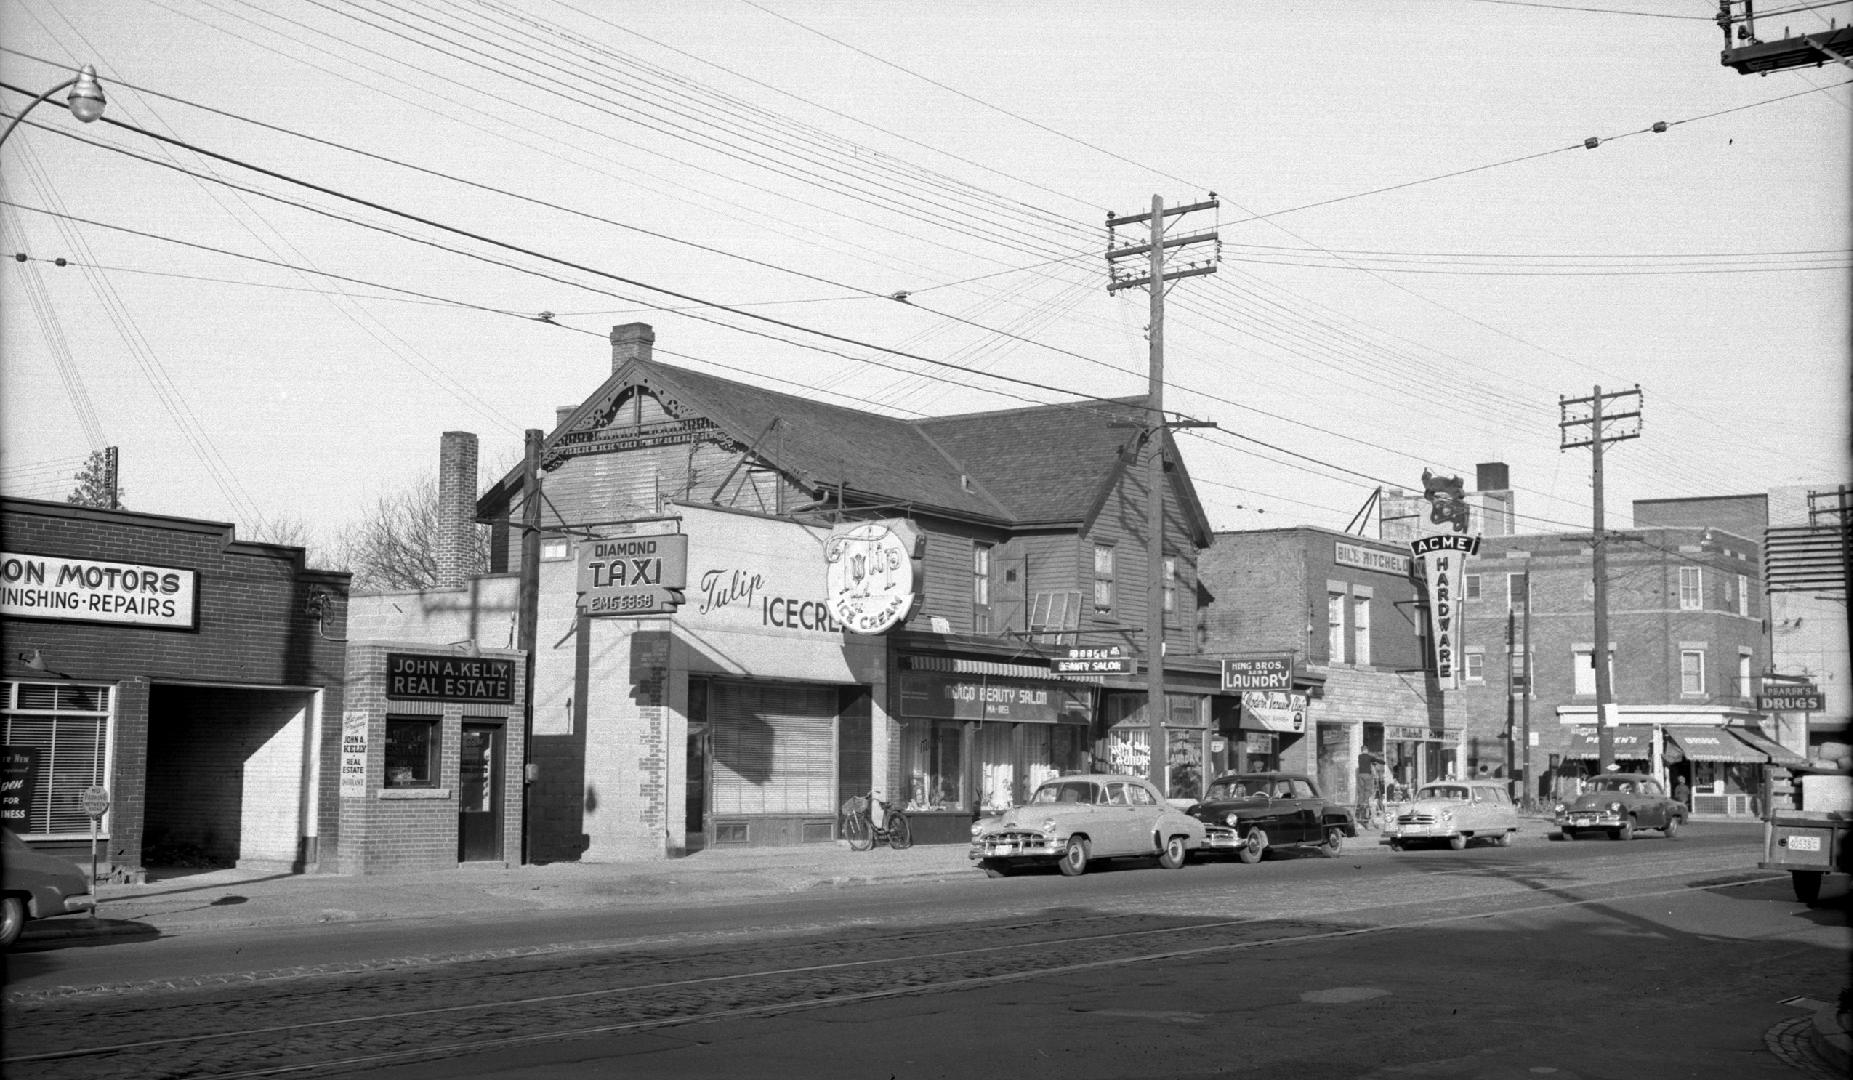 Bedford Park Hotel, Yonge Street, west side, south of Fairlawn Avenue. Image shows a two storey ...